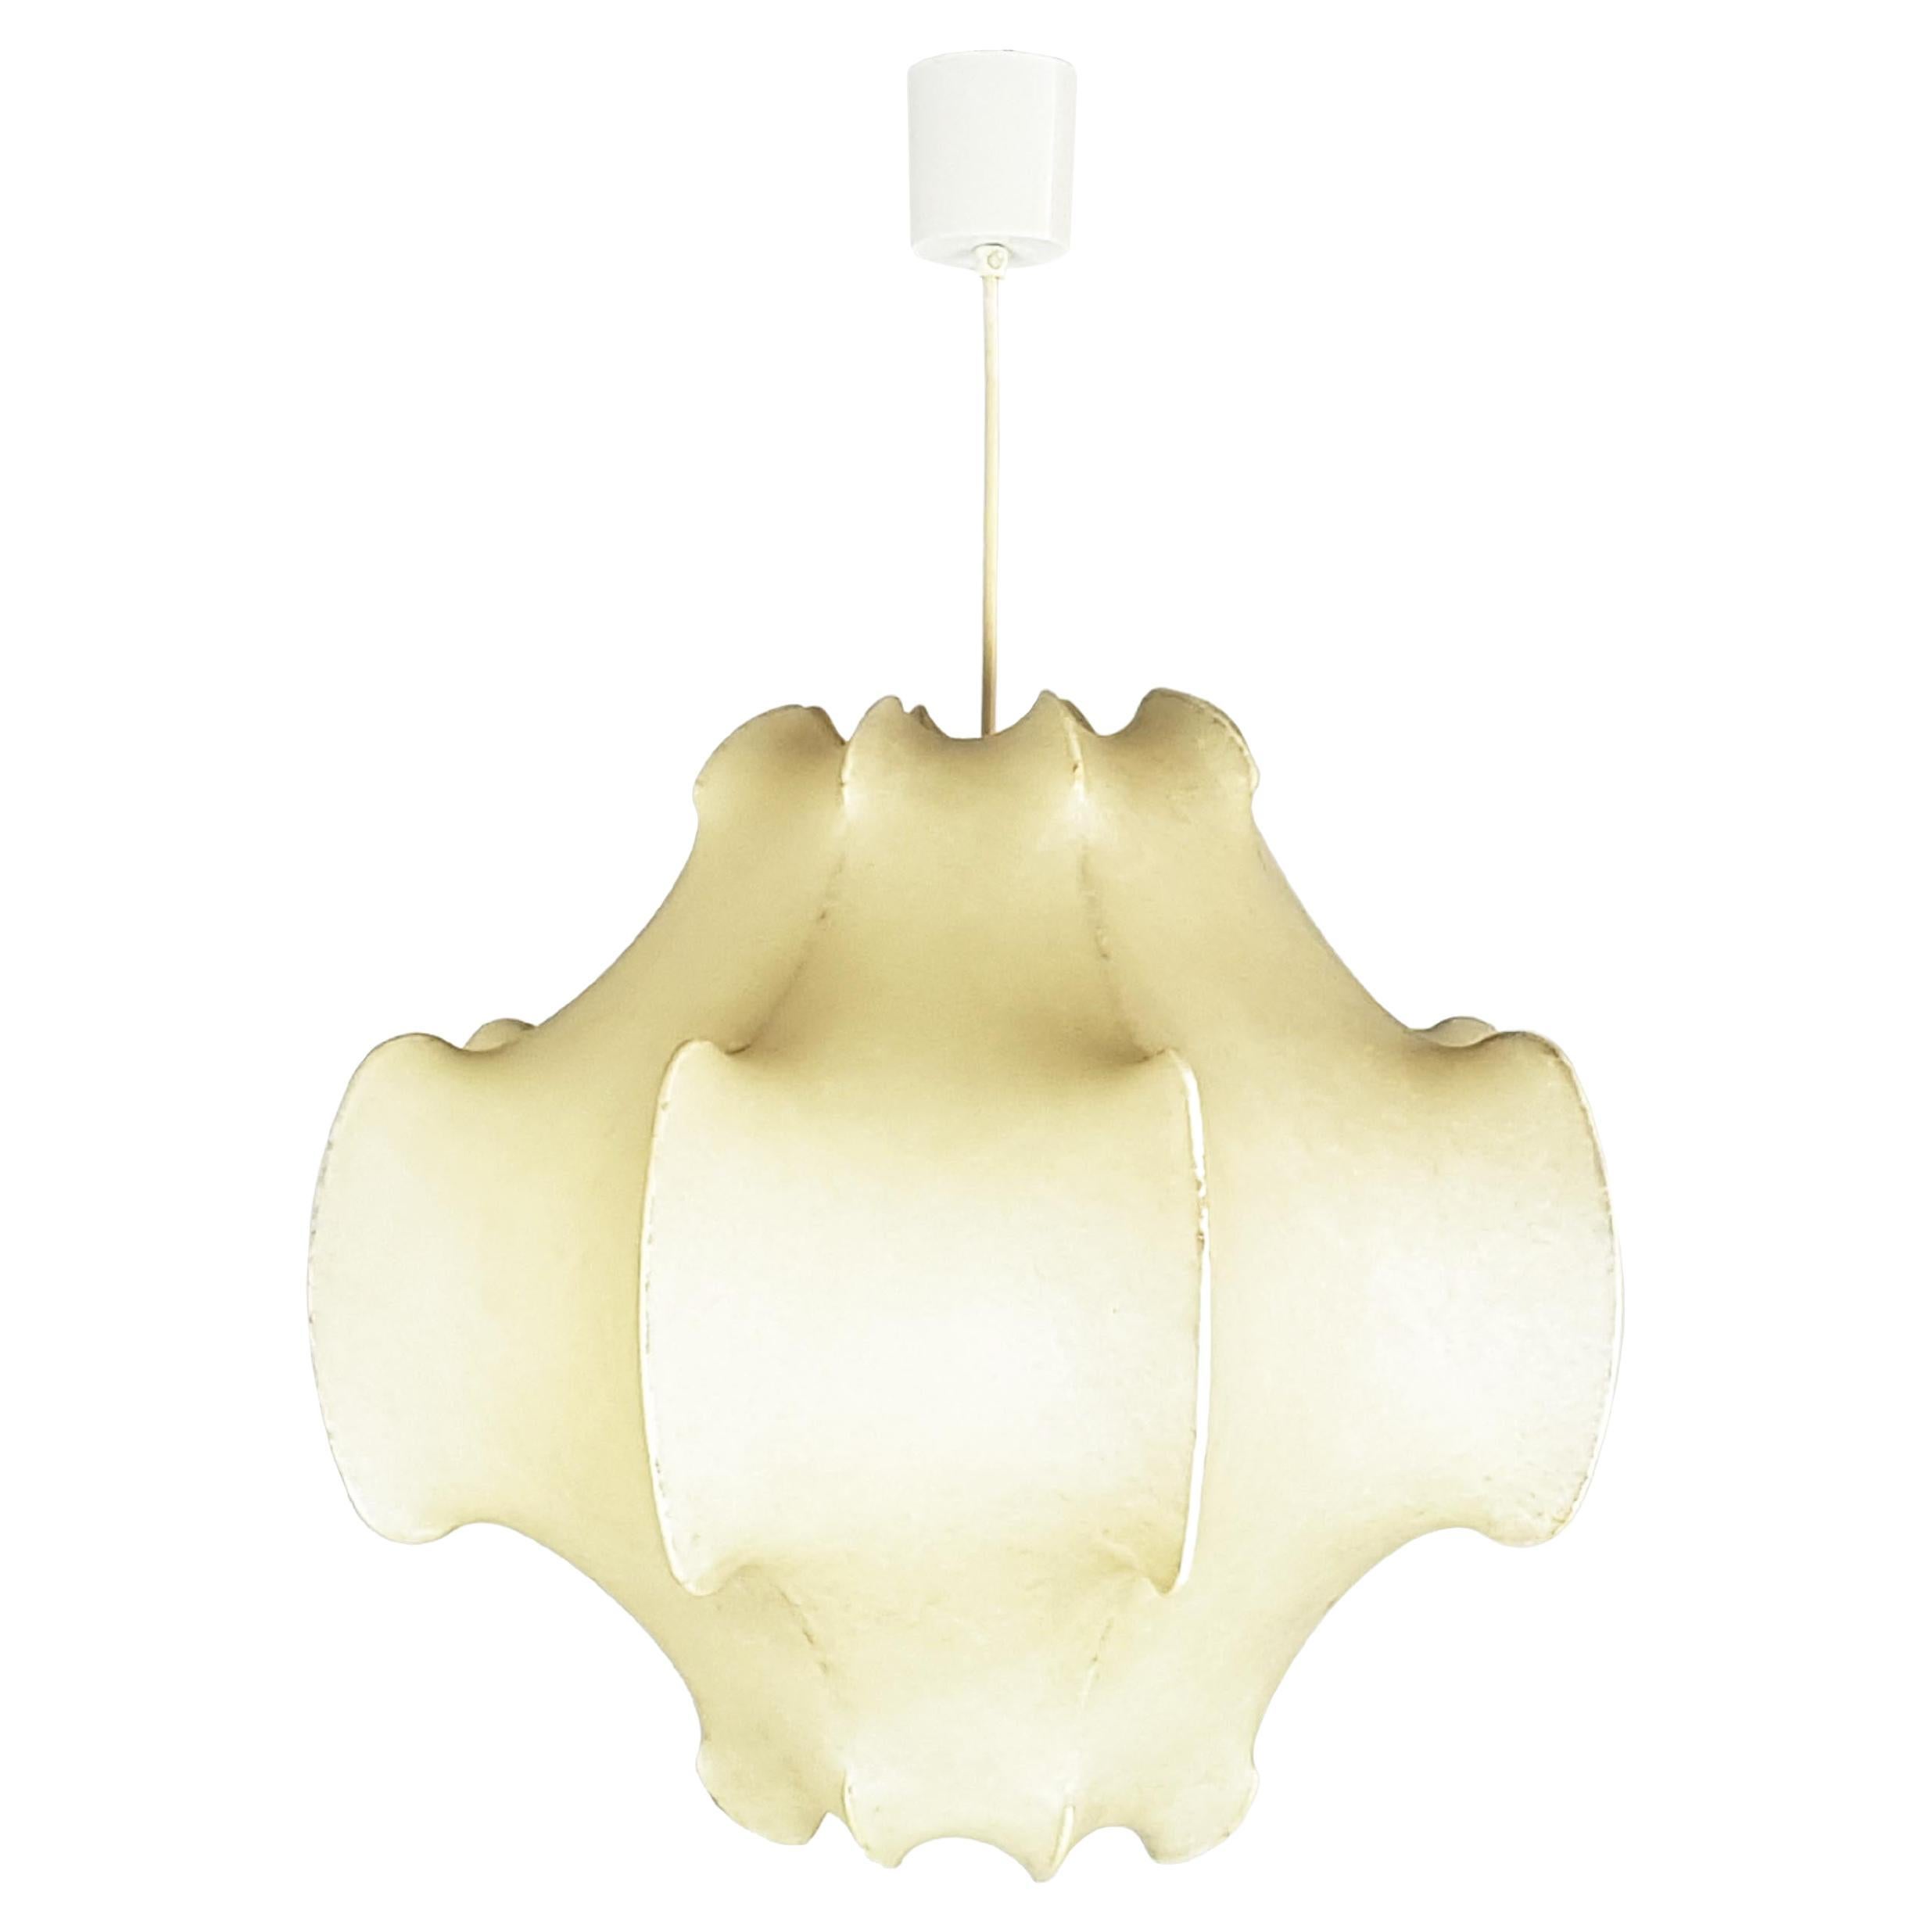 Vintage Cocoon Pendant lamp in the style of Castiglioni Brothers/ Flos, 1960s